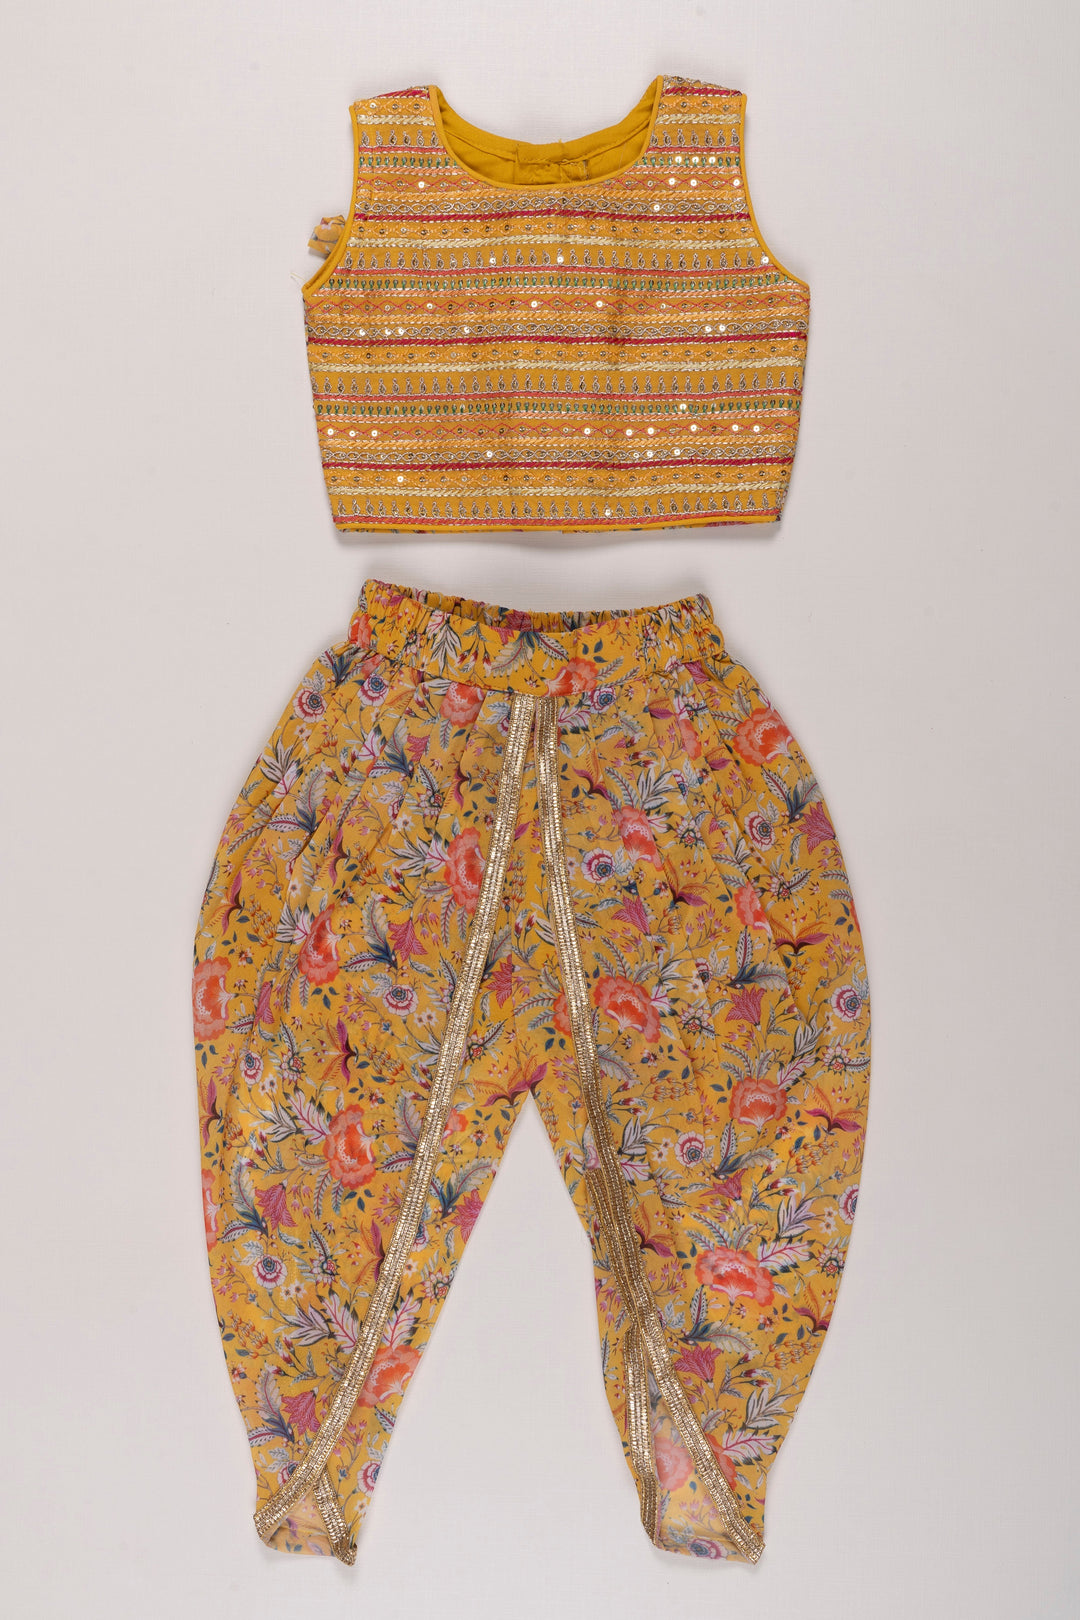 The Nesavu Girls Dothi Sets Vibrant Yellow Crop Top with Floral Dhoti Pant Set for Girls Nesavu 16 (1Y) / Yellow GPS259A-16 Girls Yellow Crop Top Floral Dhoti Pant Set | Festive Ethnic Wear for Girls | The Nesavu